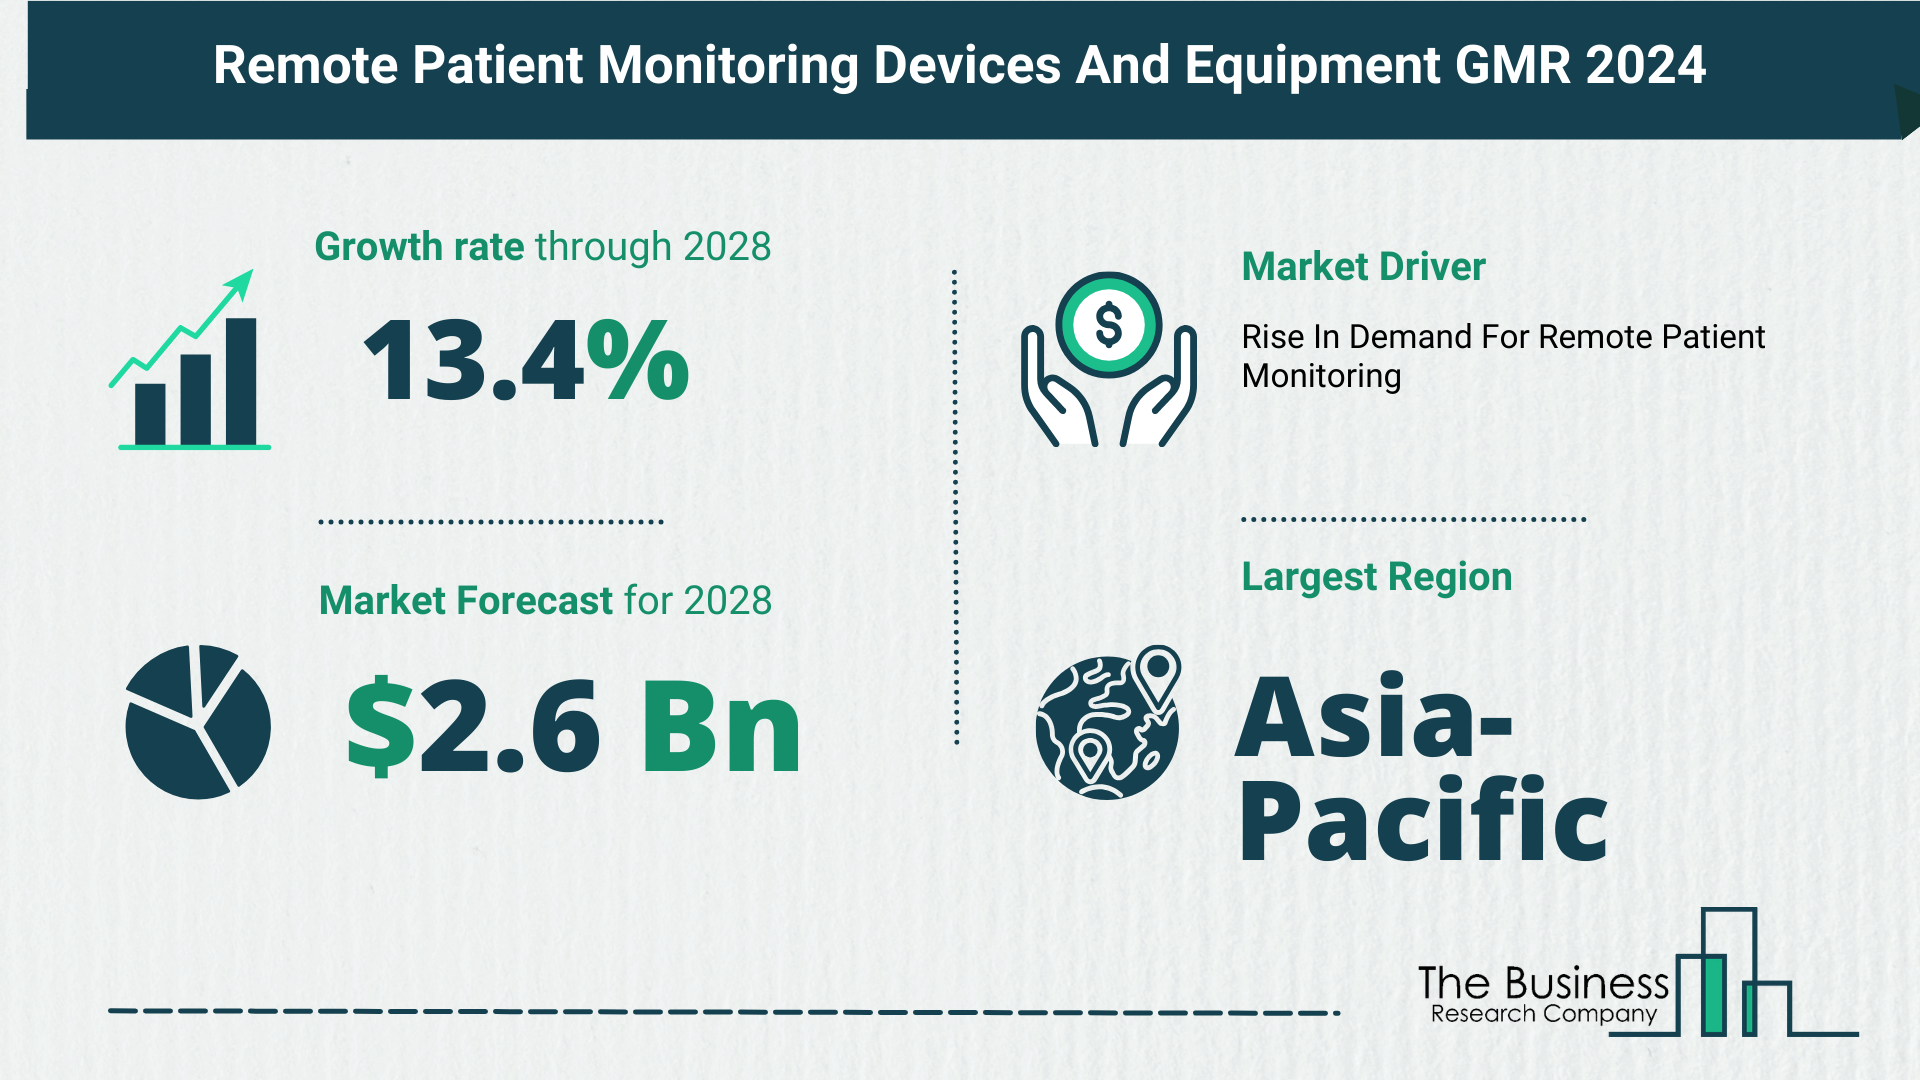 Key Takeaways From The Global Remote Patient Monitoring Devices And Equipment Market Forecast 2024